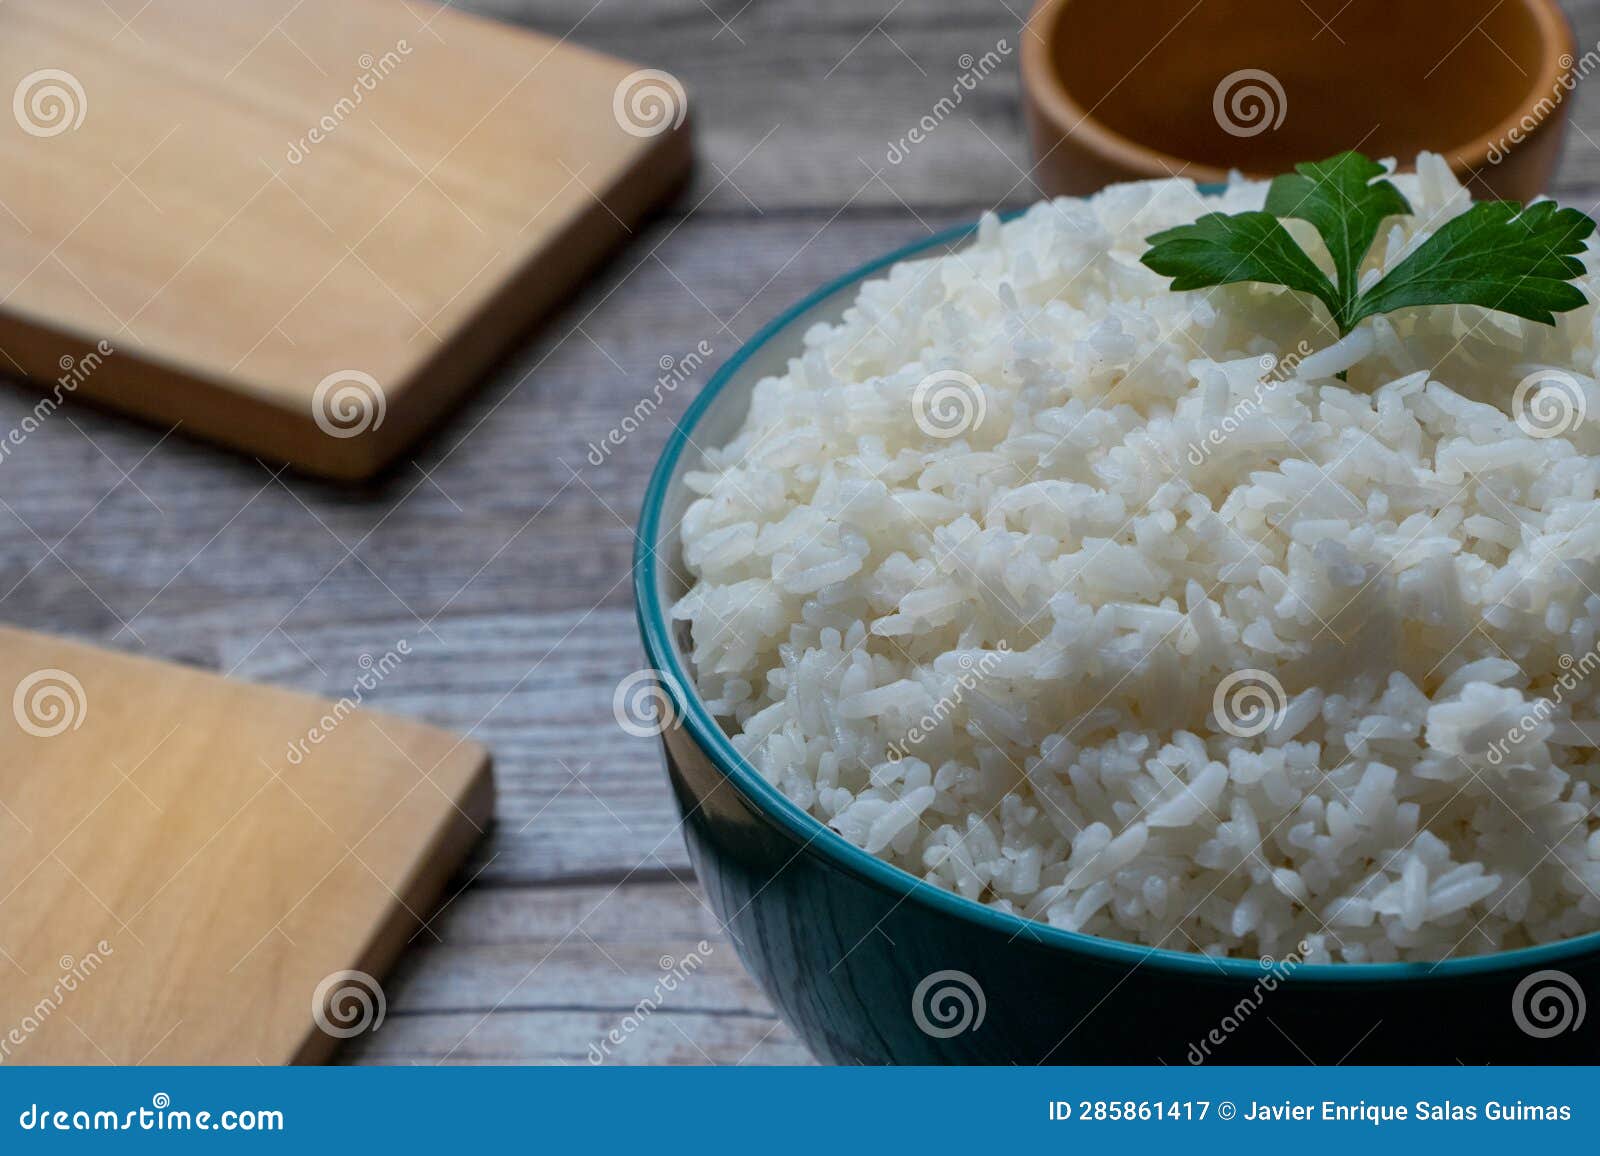 green bowl with white rice.